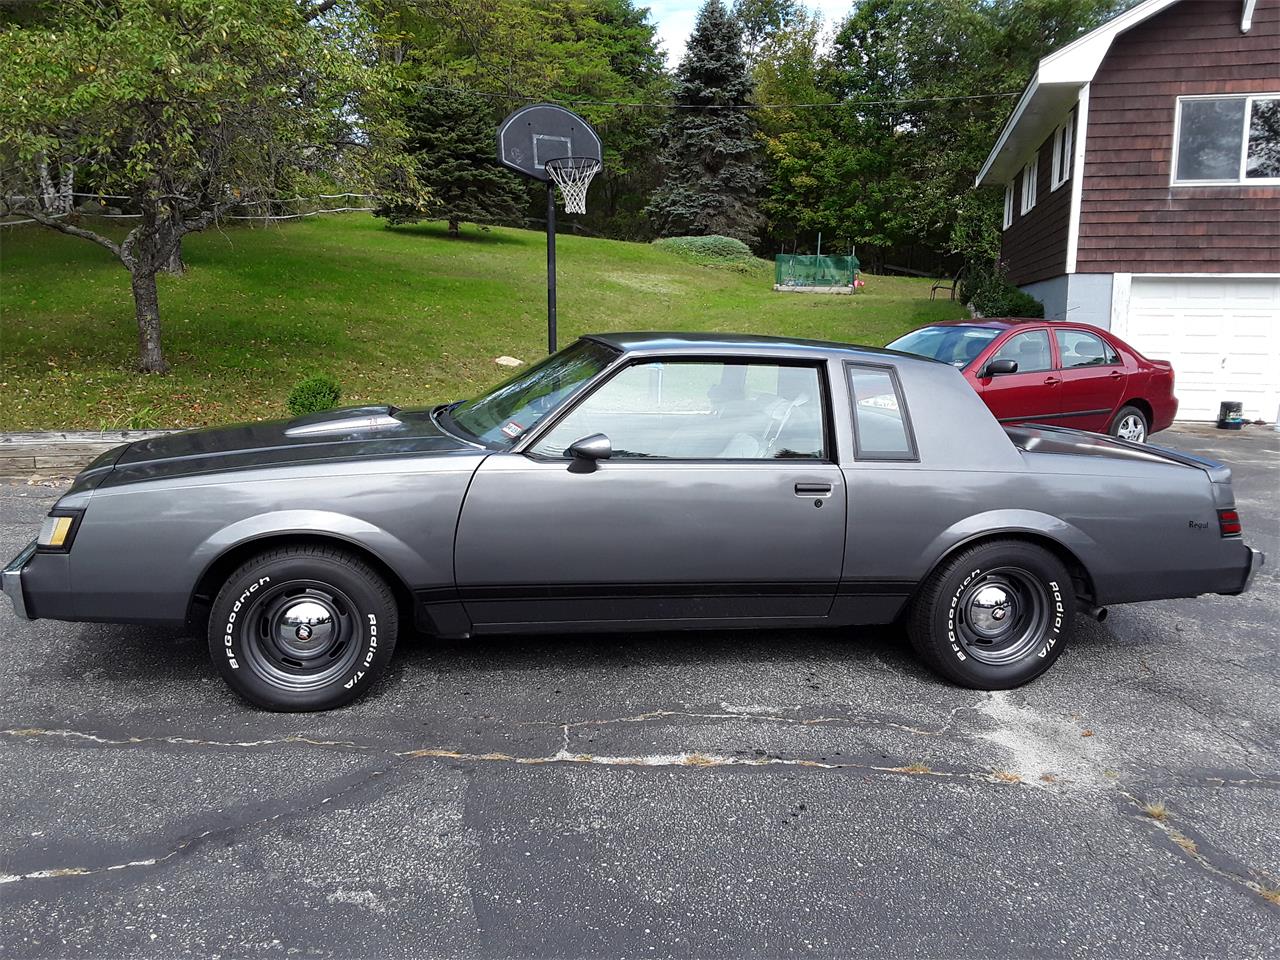 1985 buick regal for sale in sunapee nh classiccarsbay com 1985 buick regal for sale in sunapee